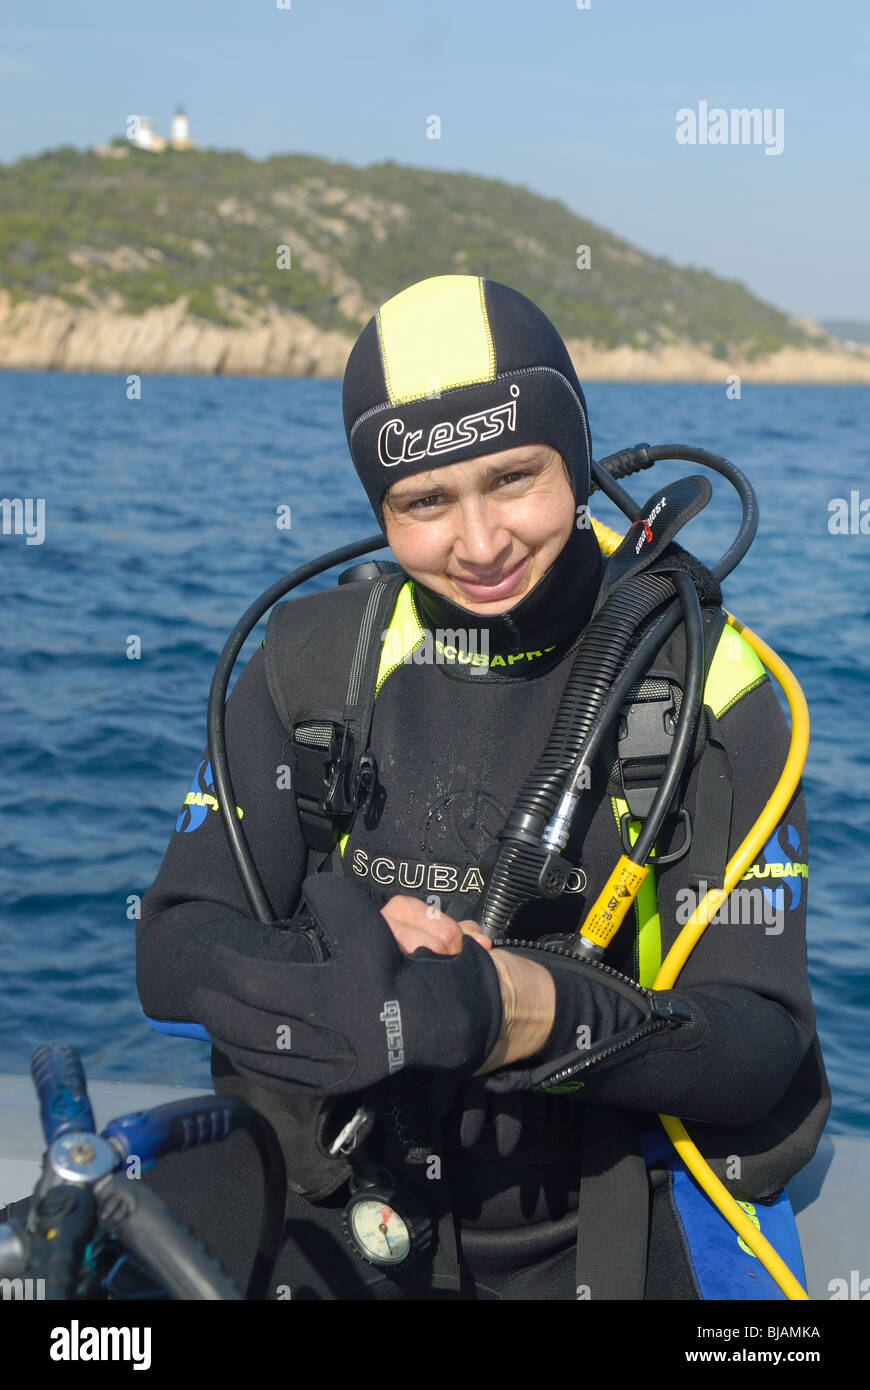 One diver ready to dive in the Mediterranean Sea Stock Photo